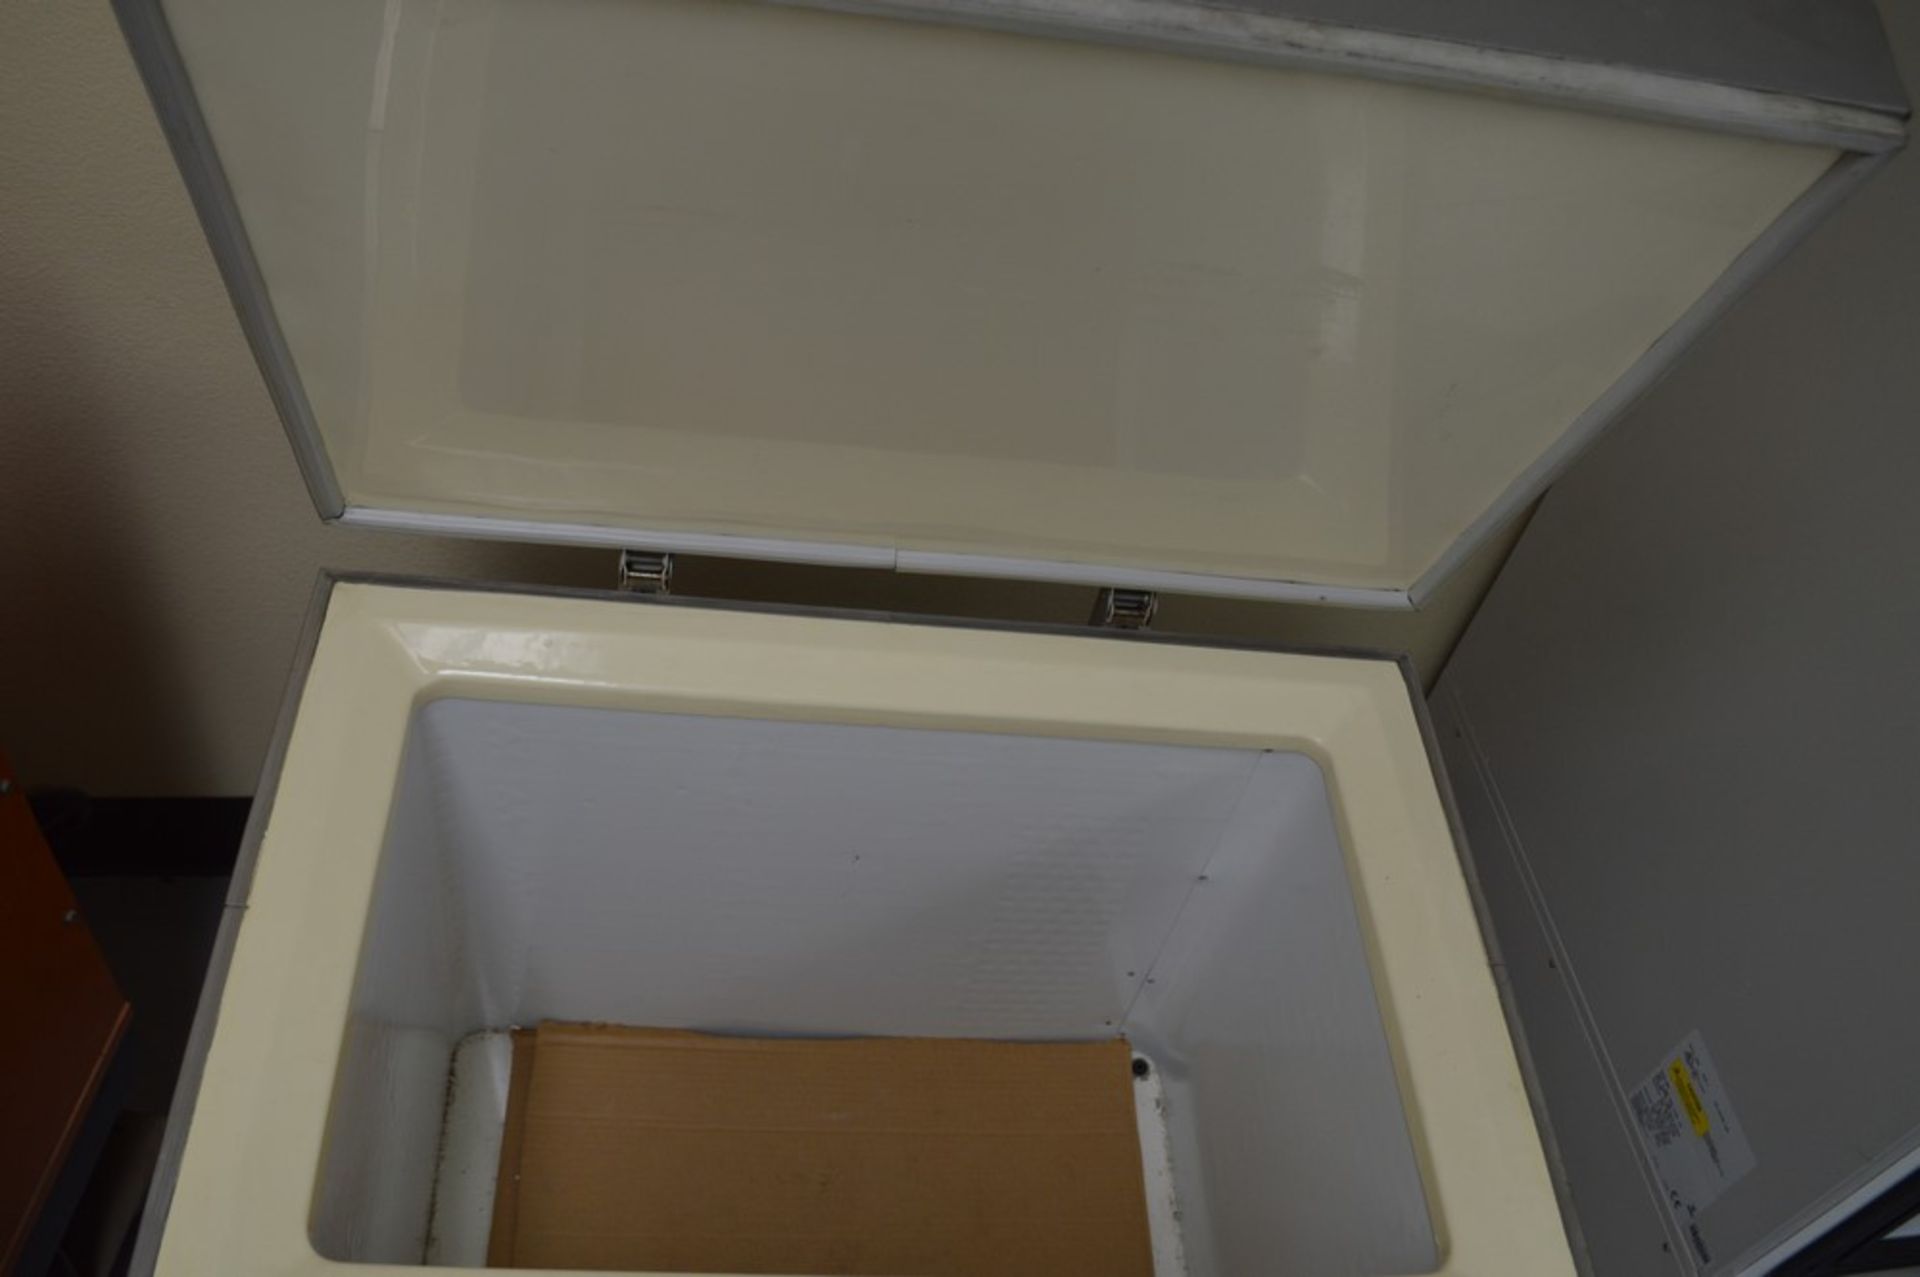 VTL-500 Dry Ice Deep Freezer, internal tub 16 1/2 x 26 1/4" x 19 1/2" deep with extra metal jacketed - Image 4 of 5